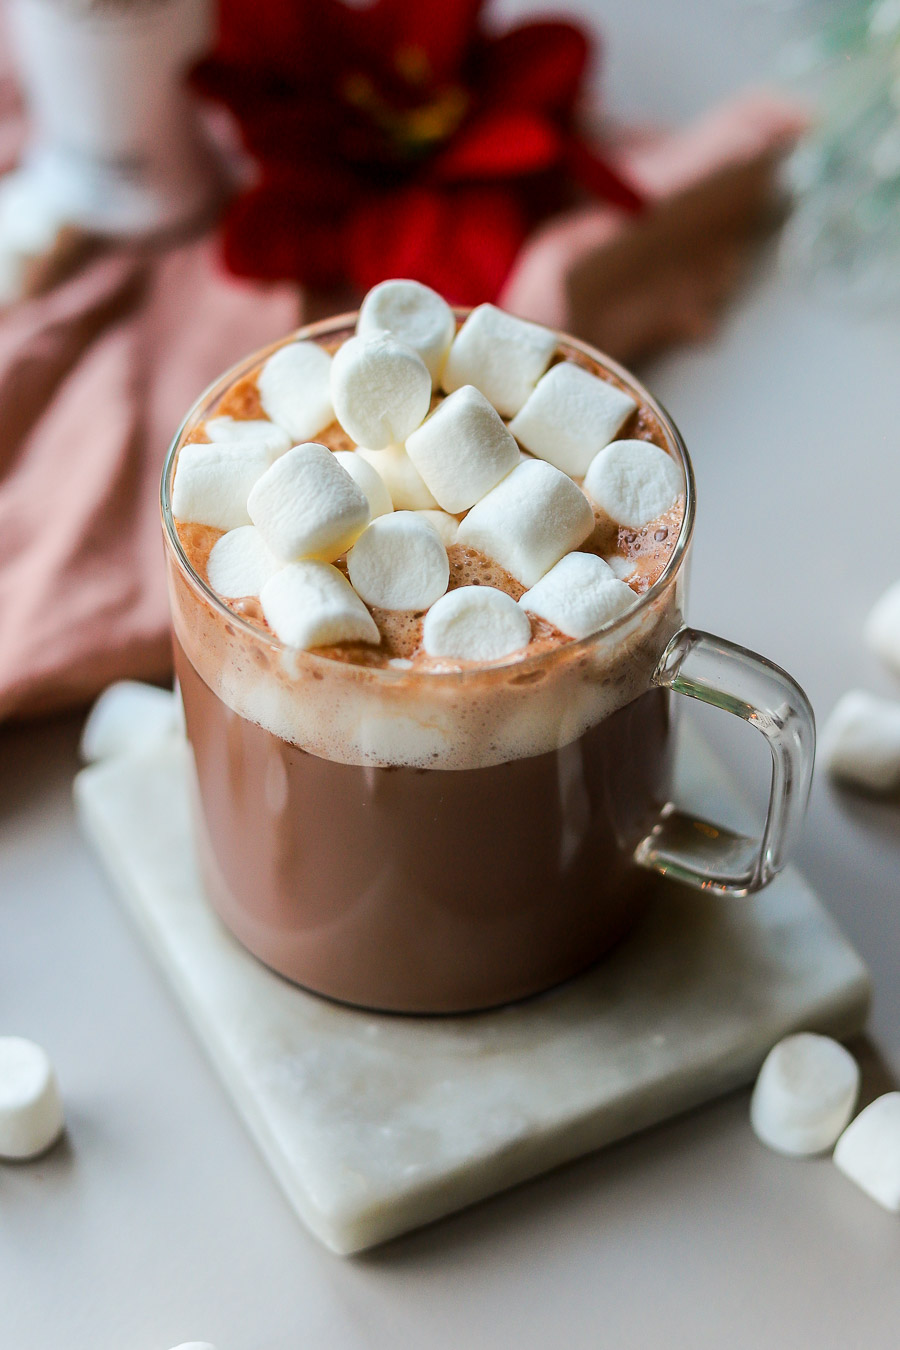 Hot chocolate with RumChata topped with mini marshmallows.